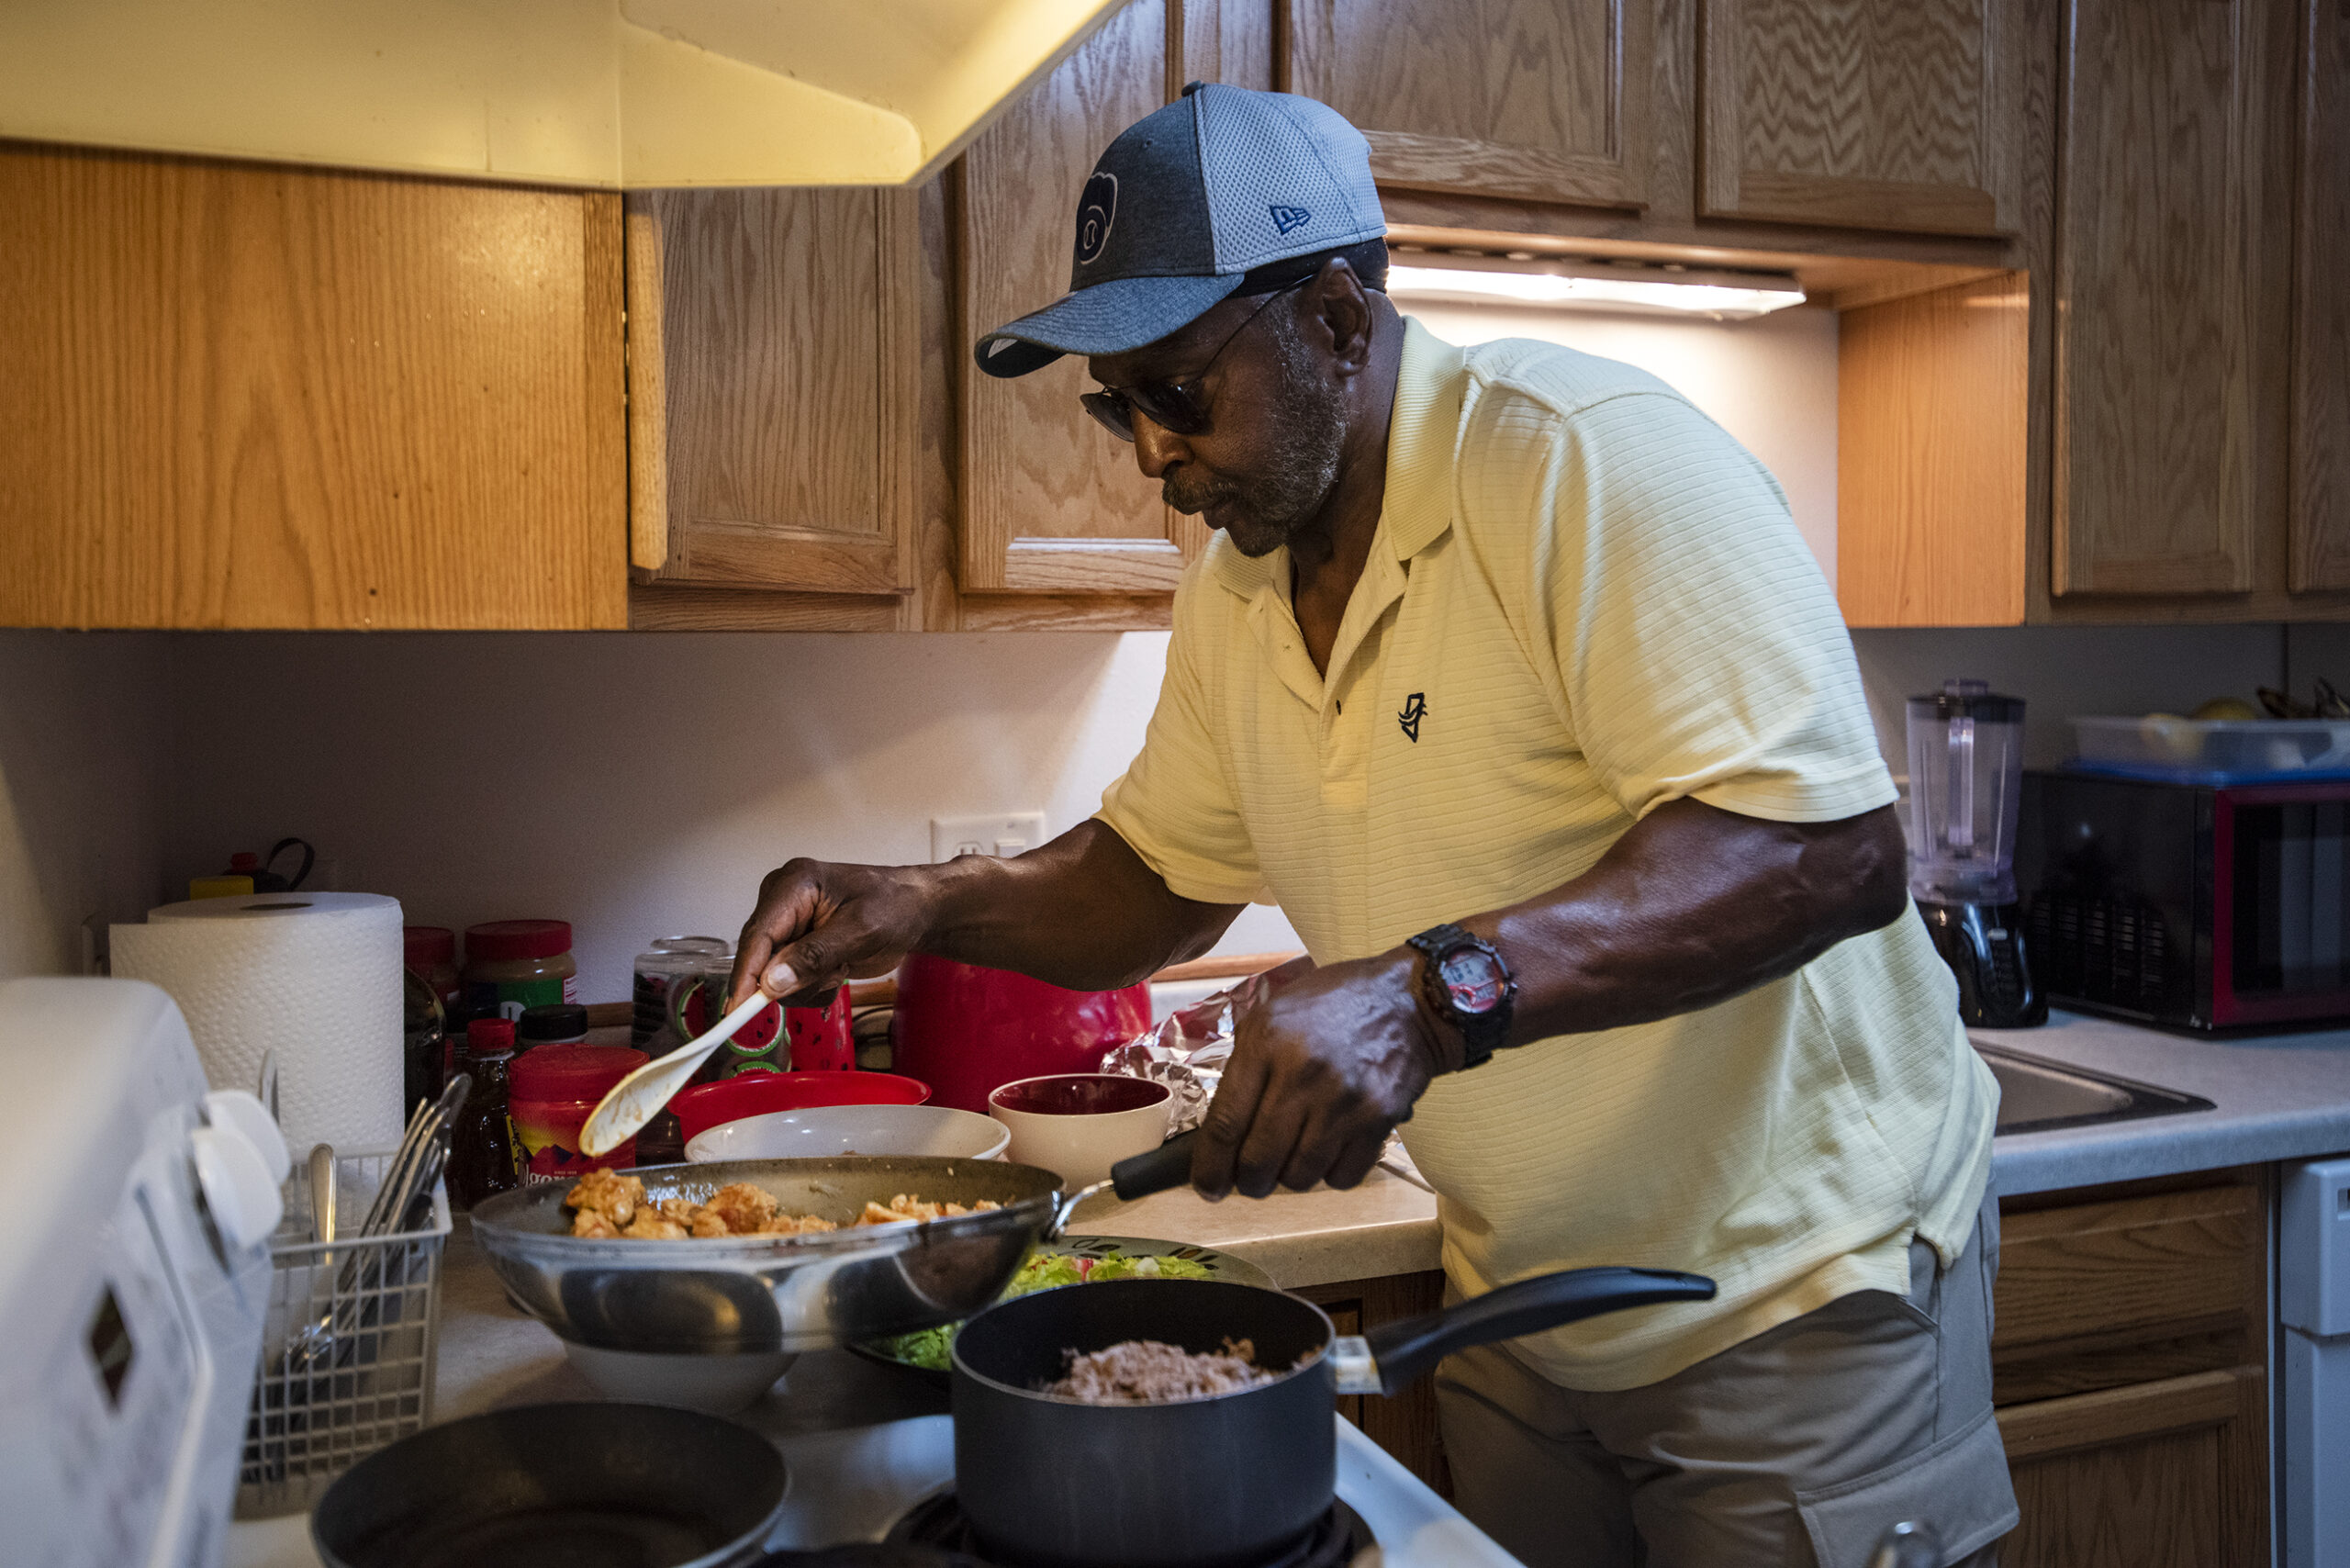 Osvaldo Durruthy cooks in his home